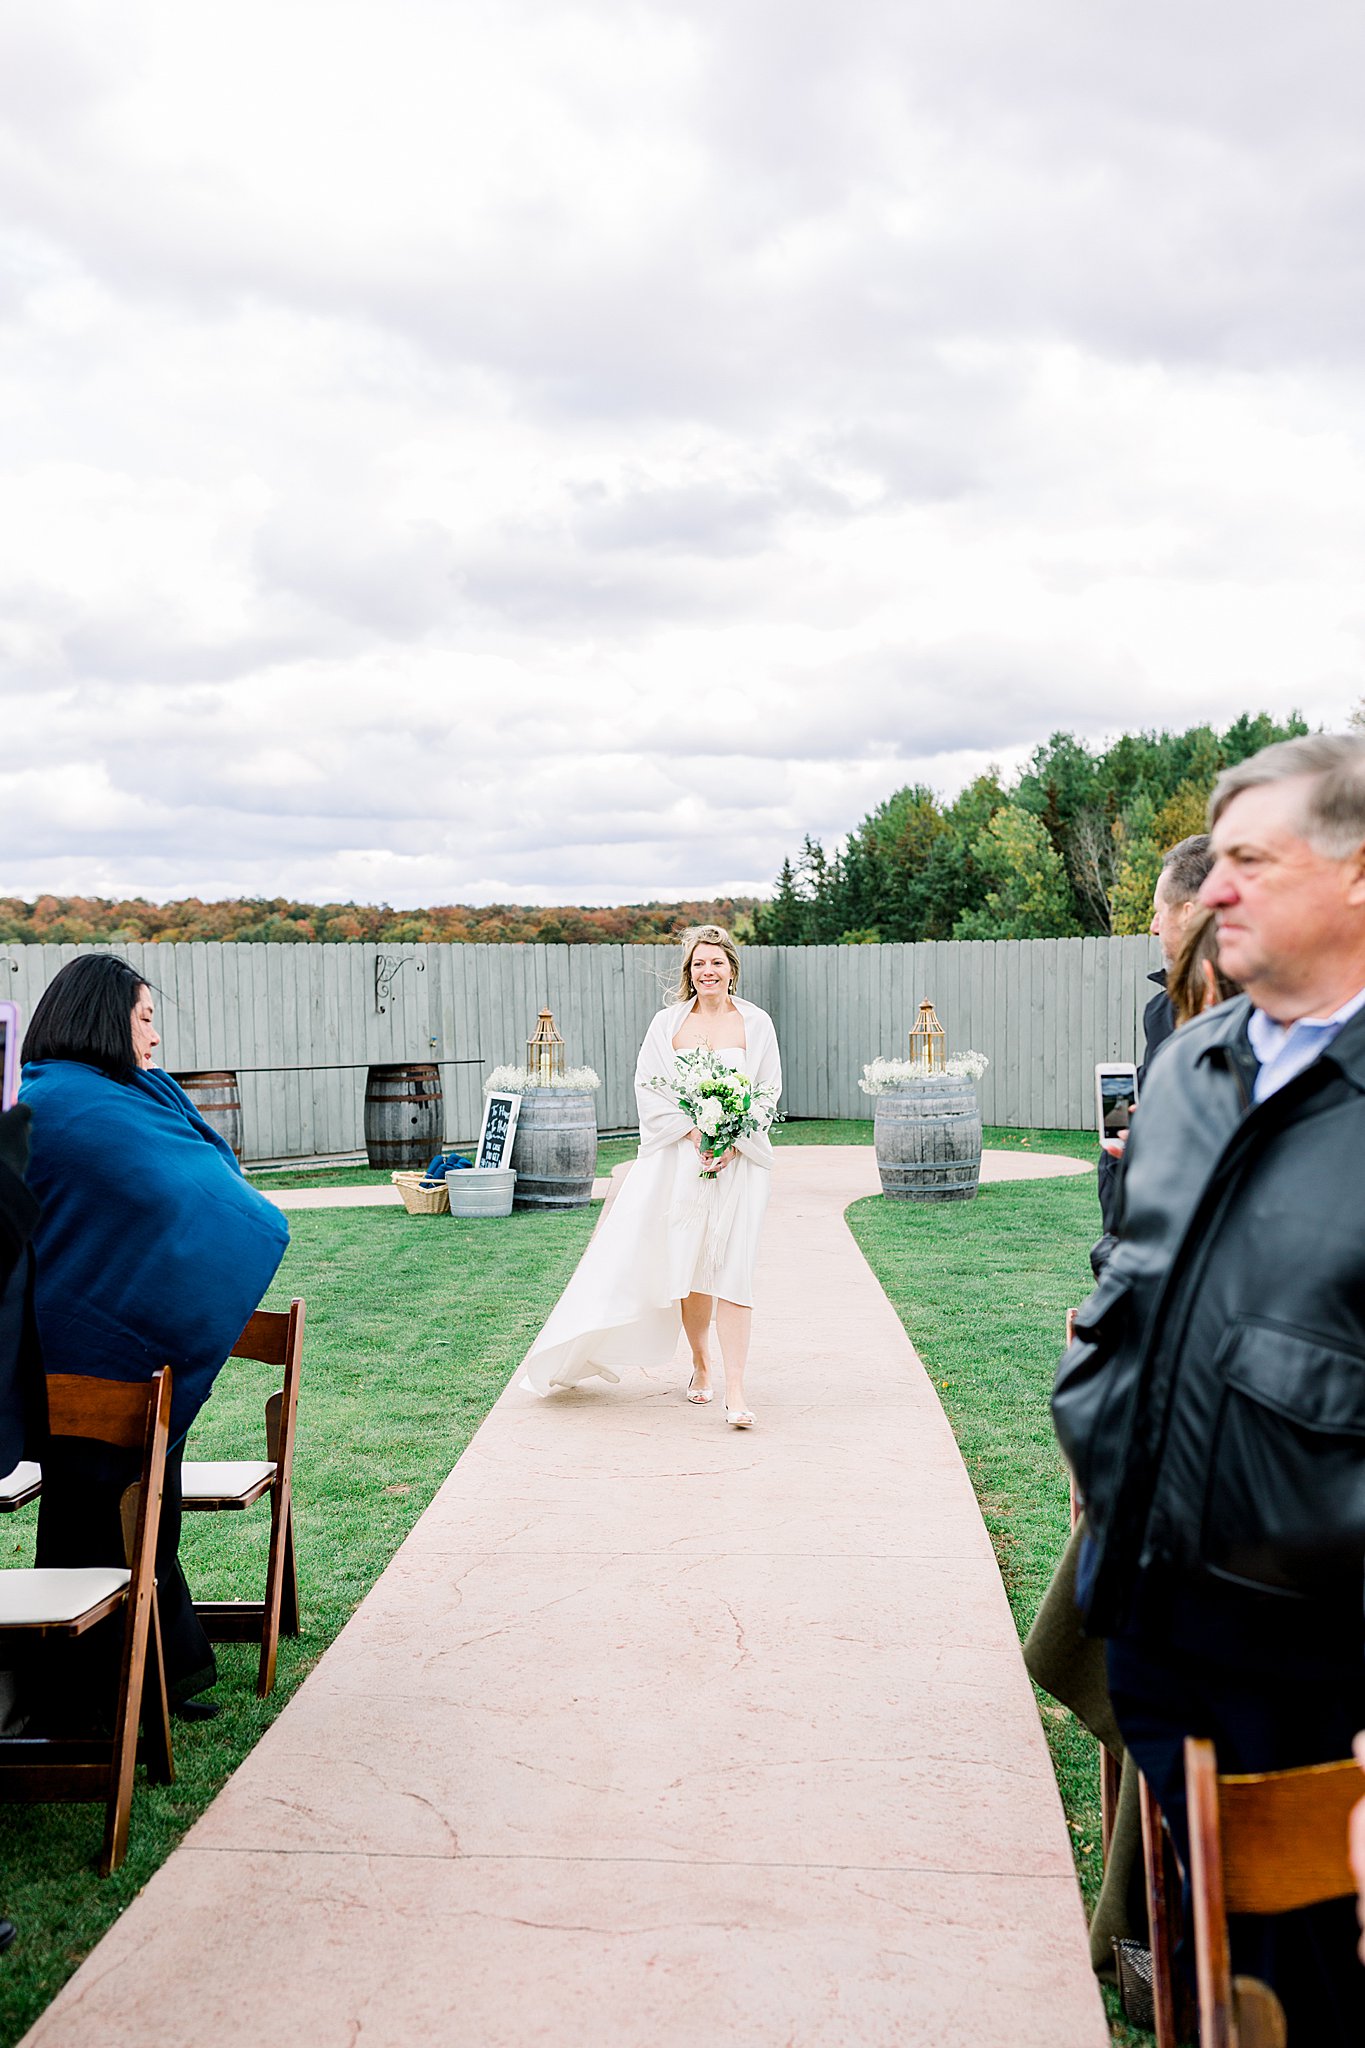 Bride walks down the aisle during terrace ceremony at Aurora Cellars wedding.